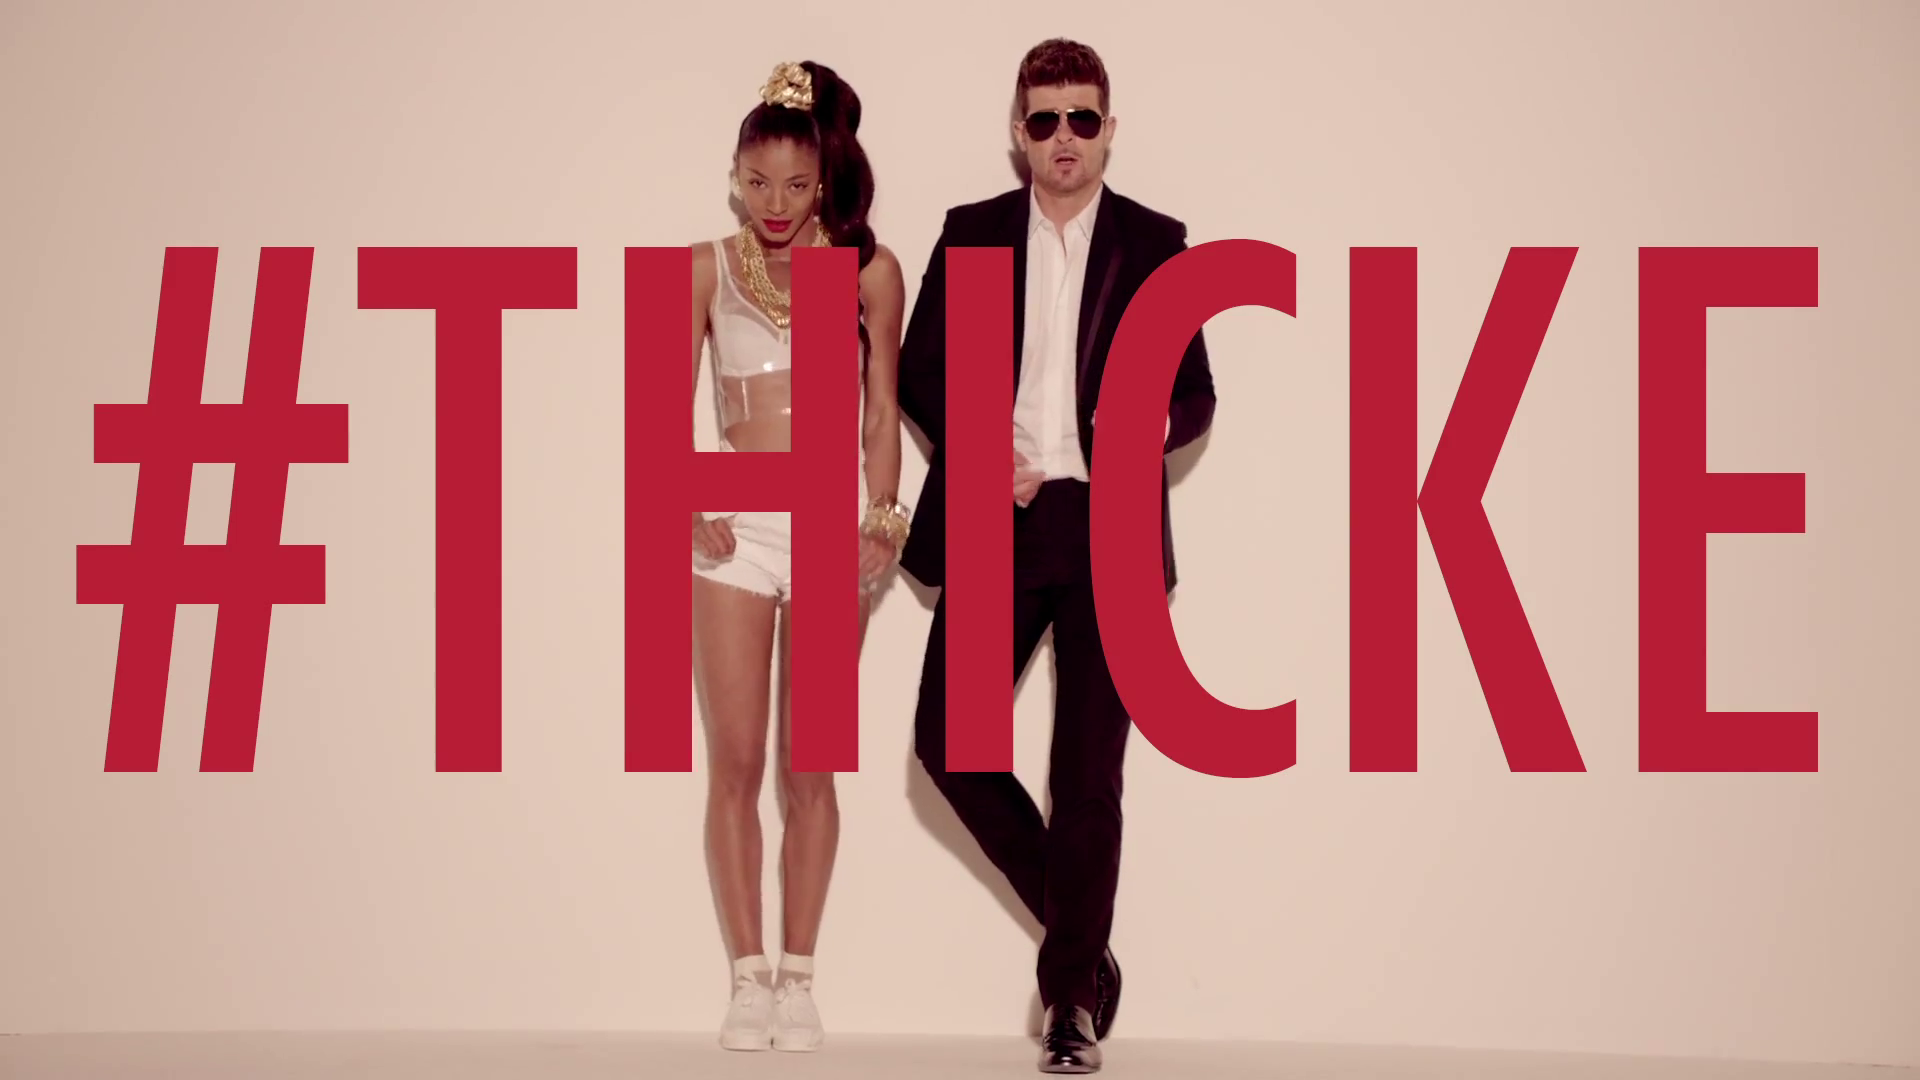 T me vzw up. Robin Thicke blurred lines. Robin Thicke blurred lines ft. T.I., Pharrell. Robin Thicke личная жизнь. Pharrell Williams and Robin Thicke.